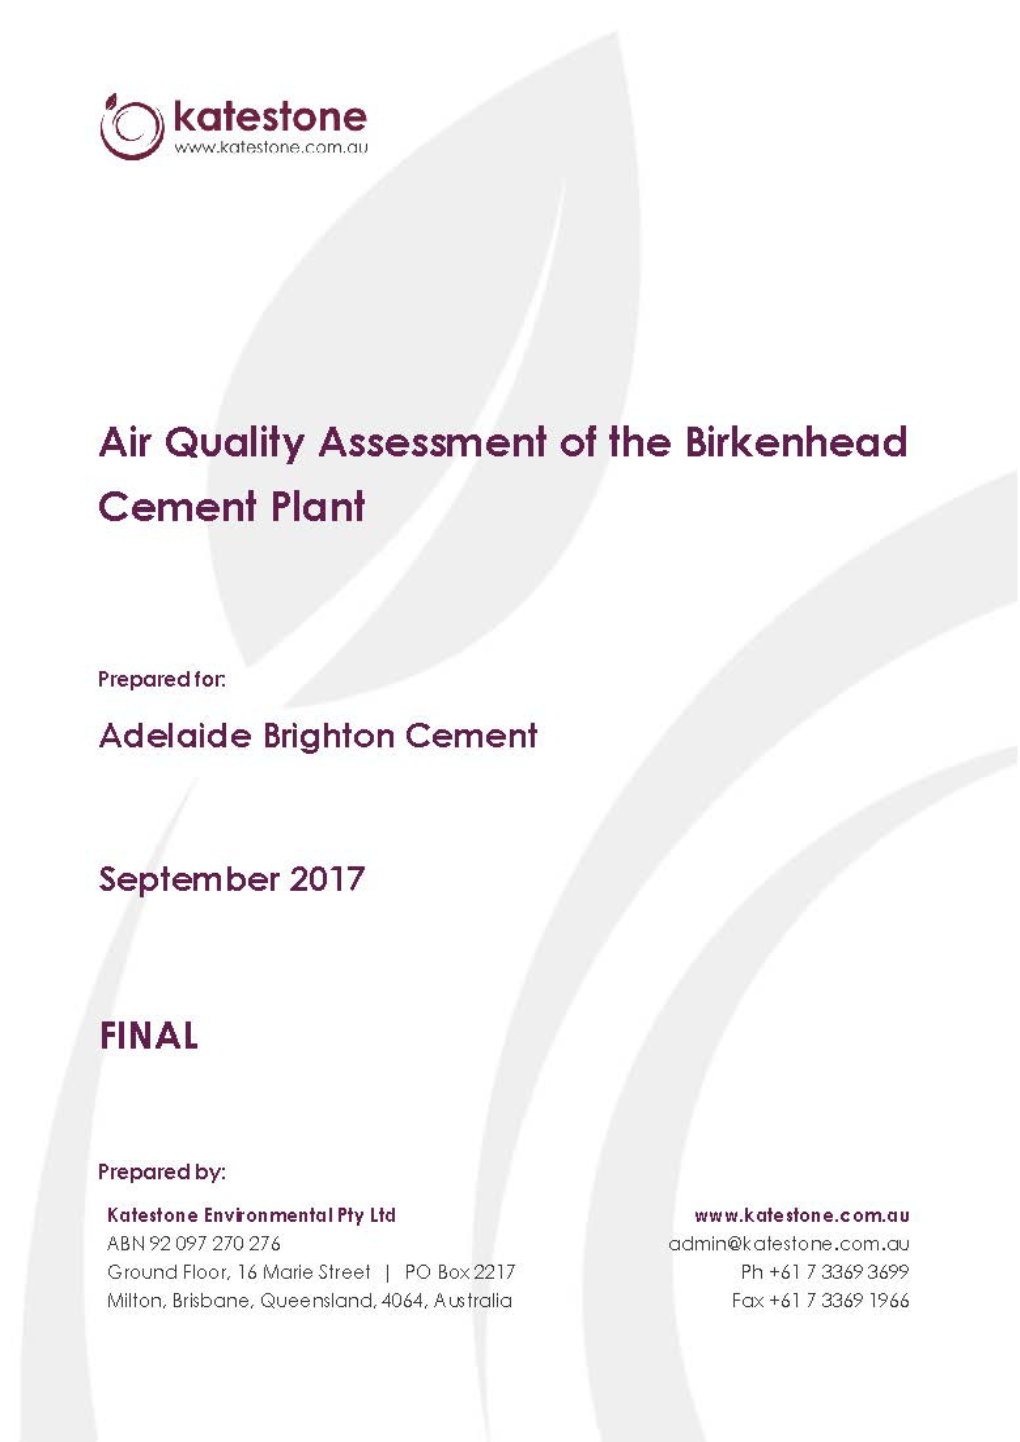 Air Quality Assessment of the Birkenhead Cement Plant, Sep 2017